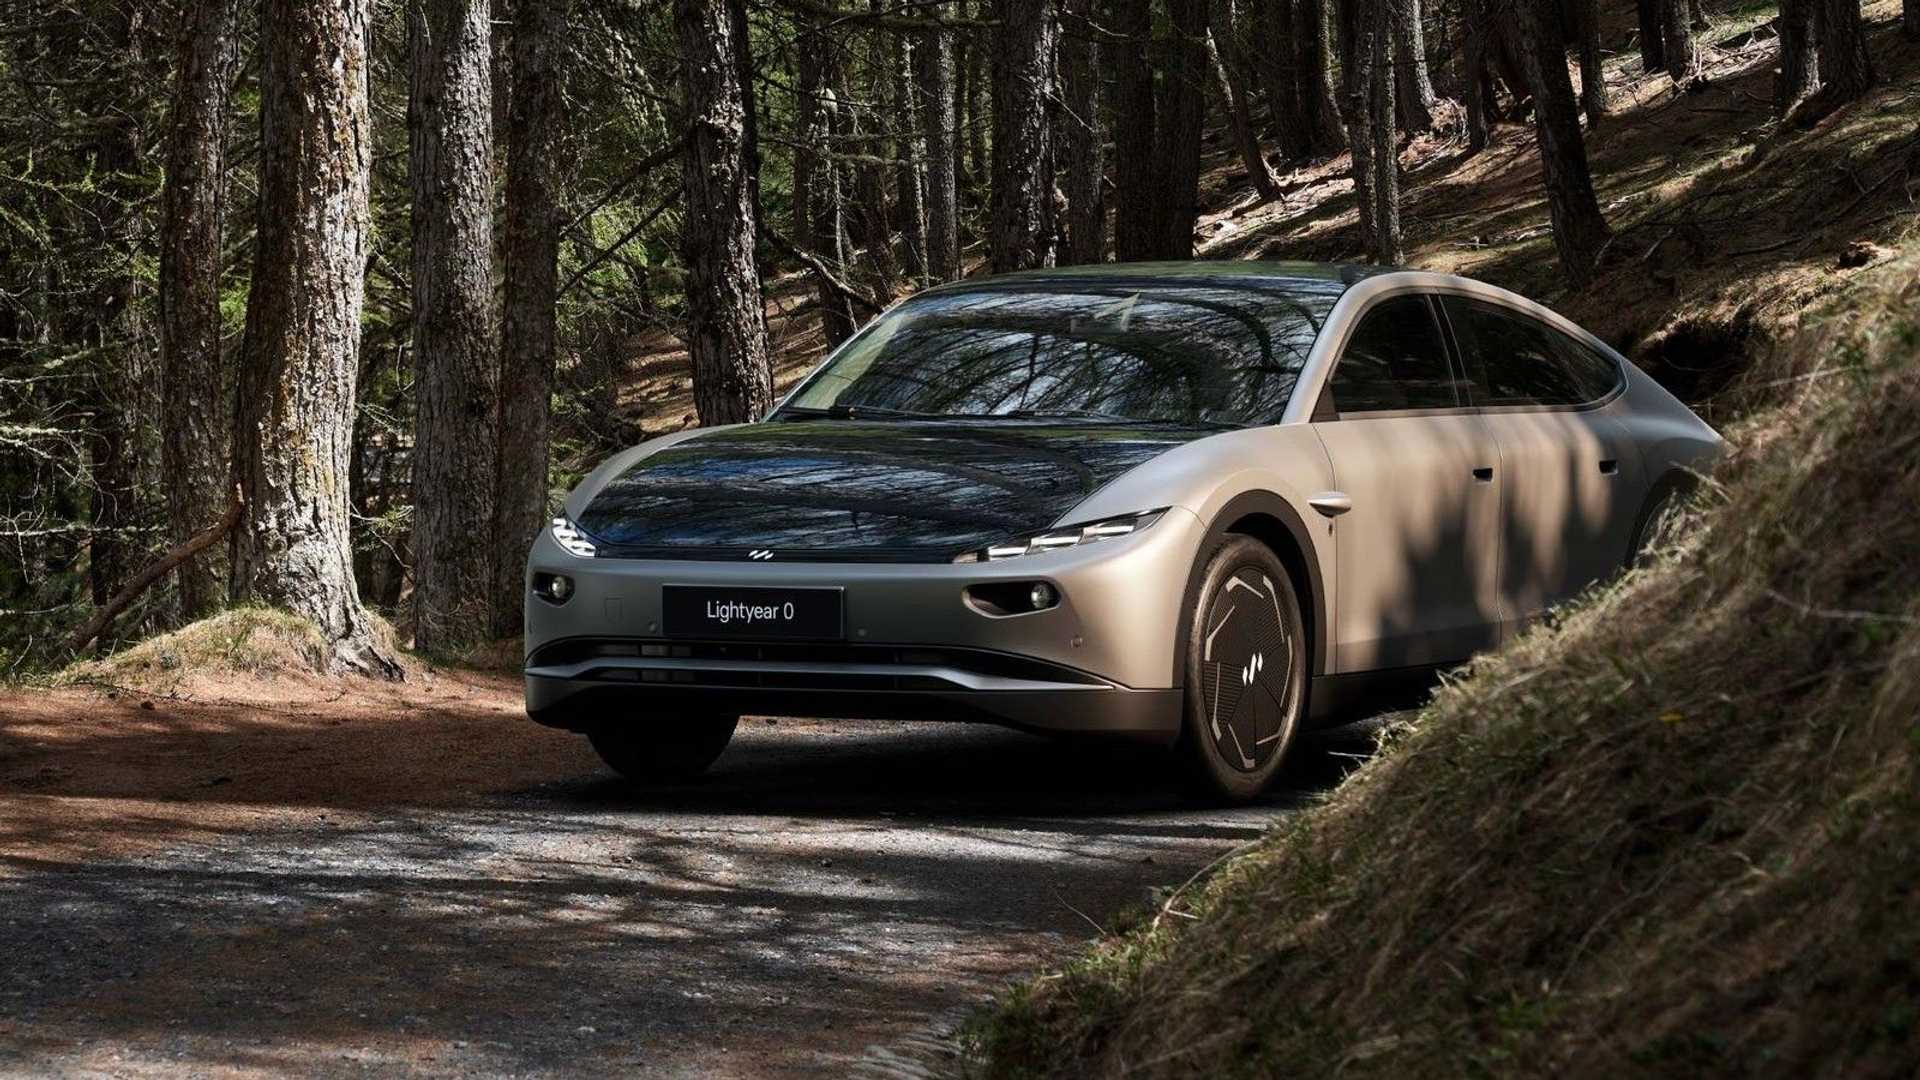 The Lightyear 0 EV in the woods